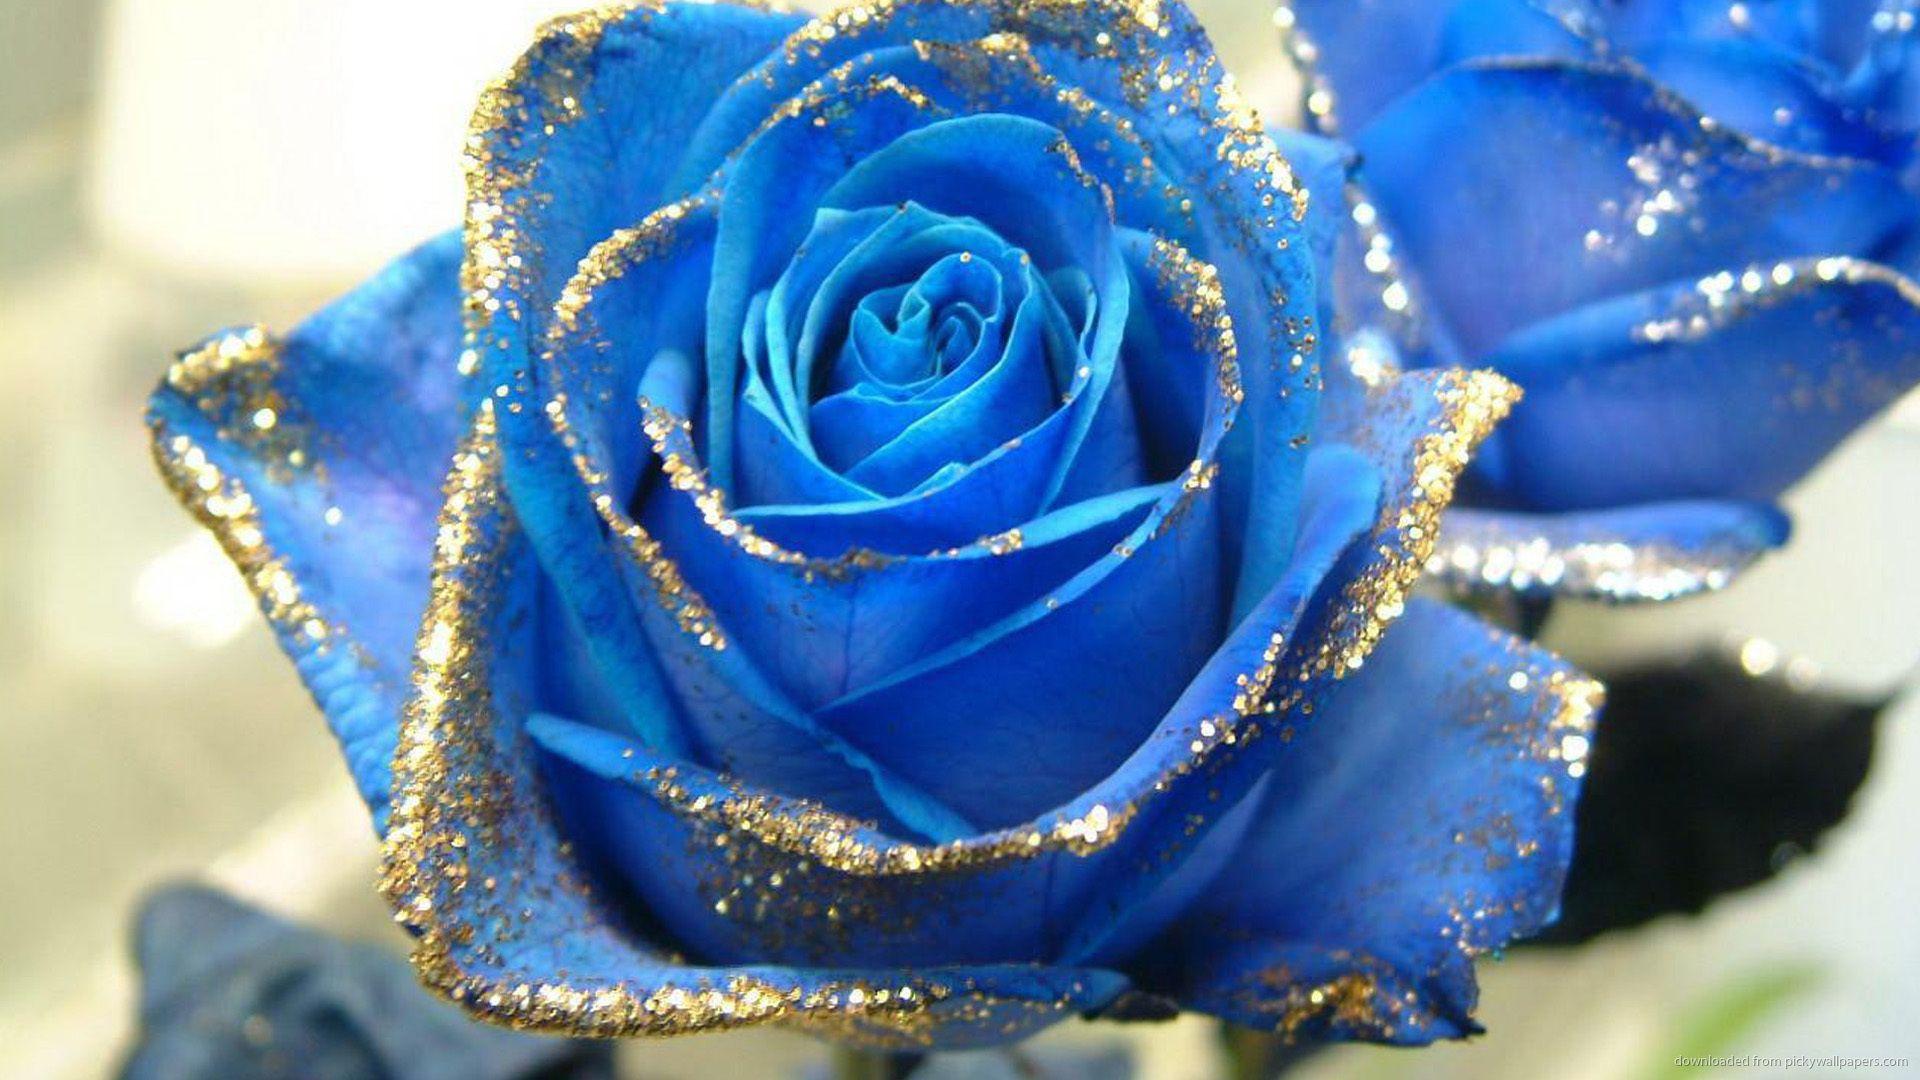 Blue Rose With Gold Glitter Wallpaper For Samsung Galaxy Tab